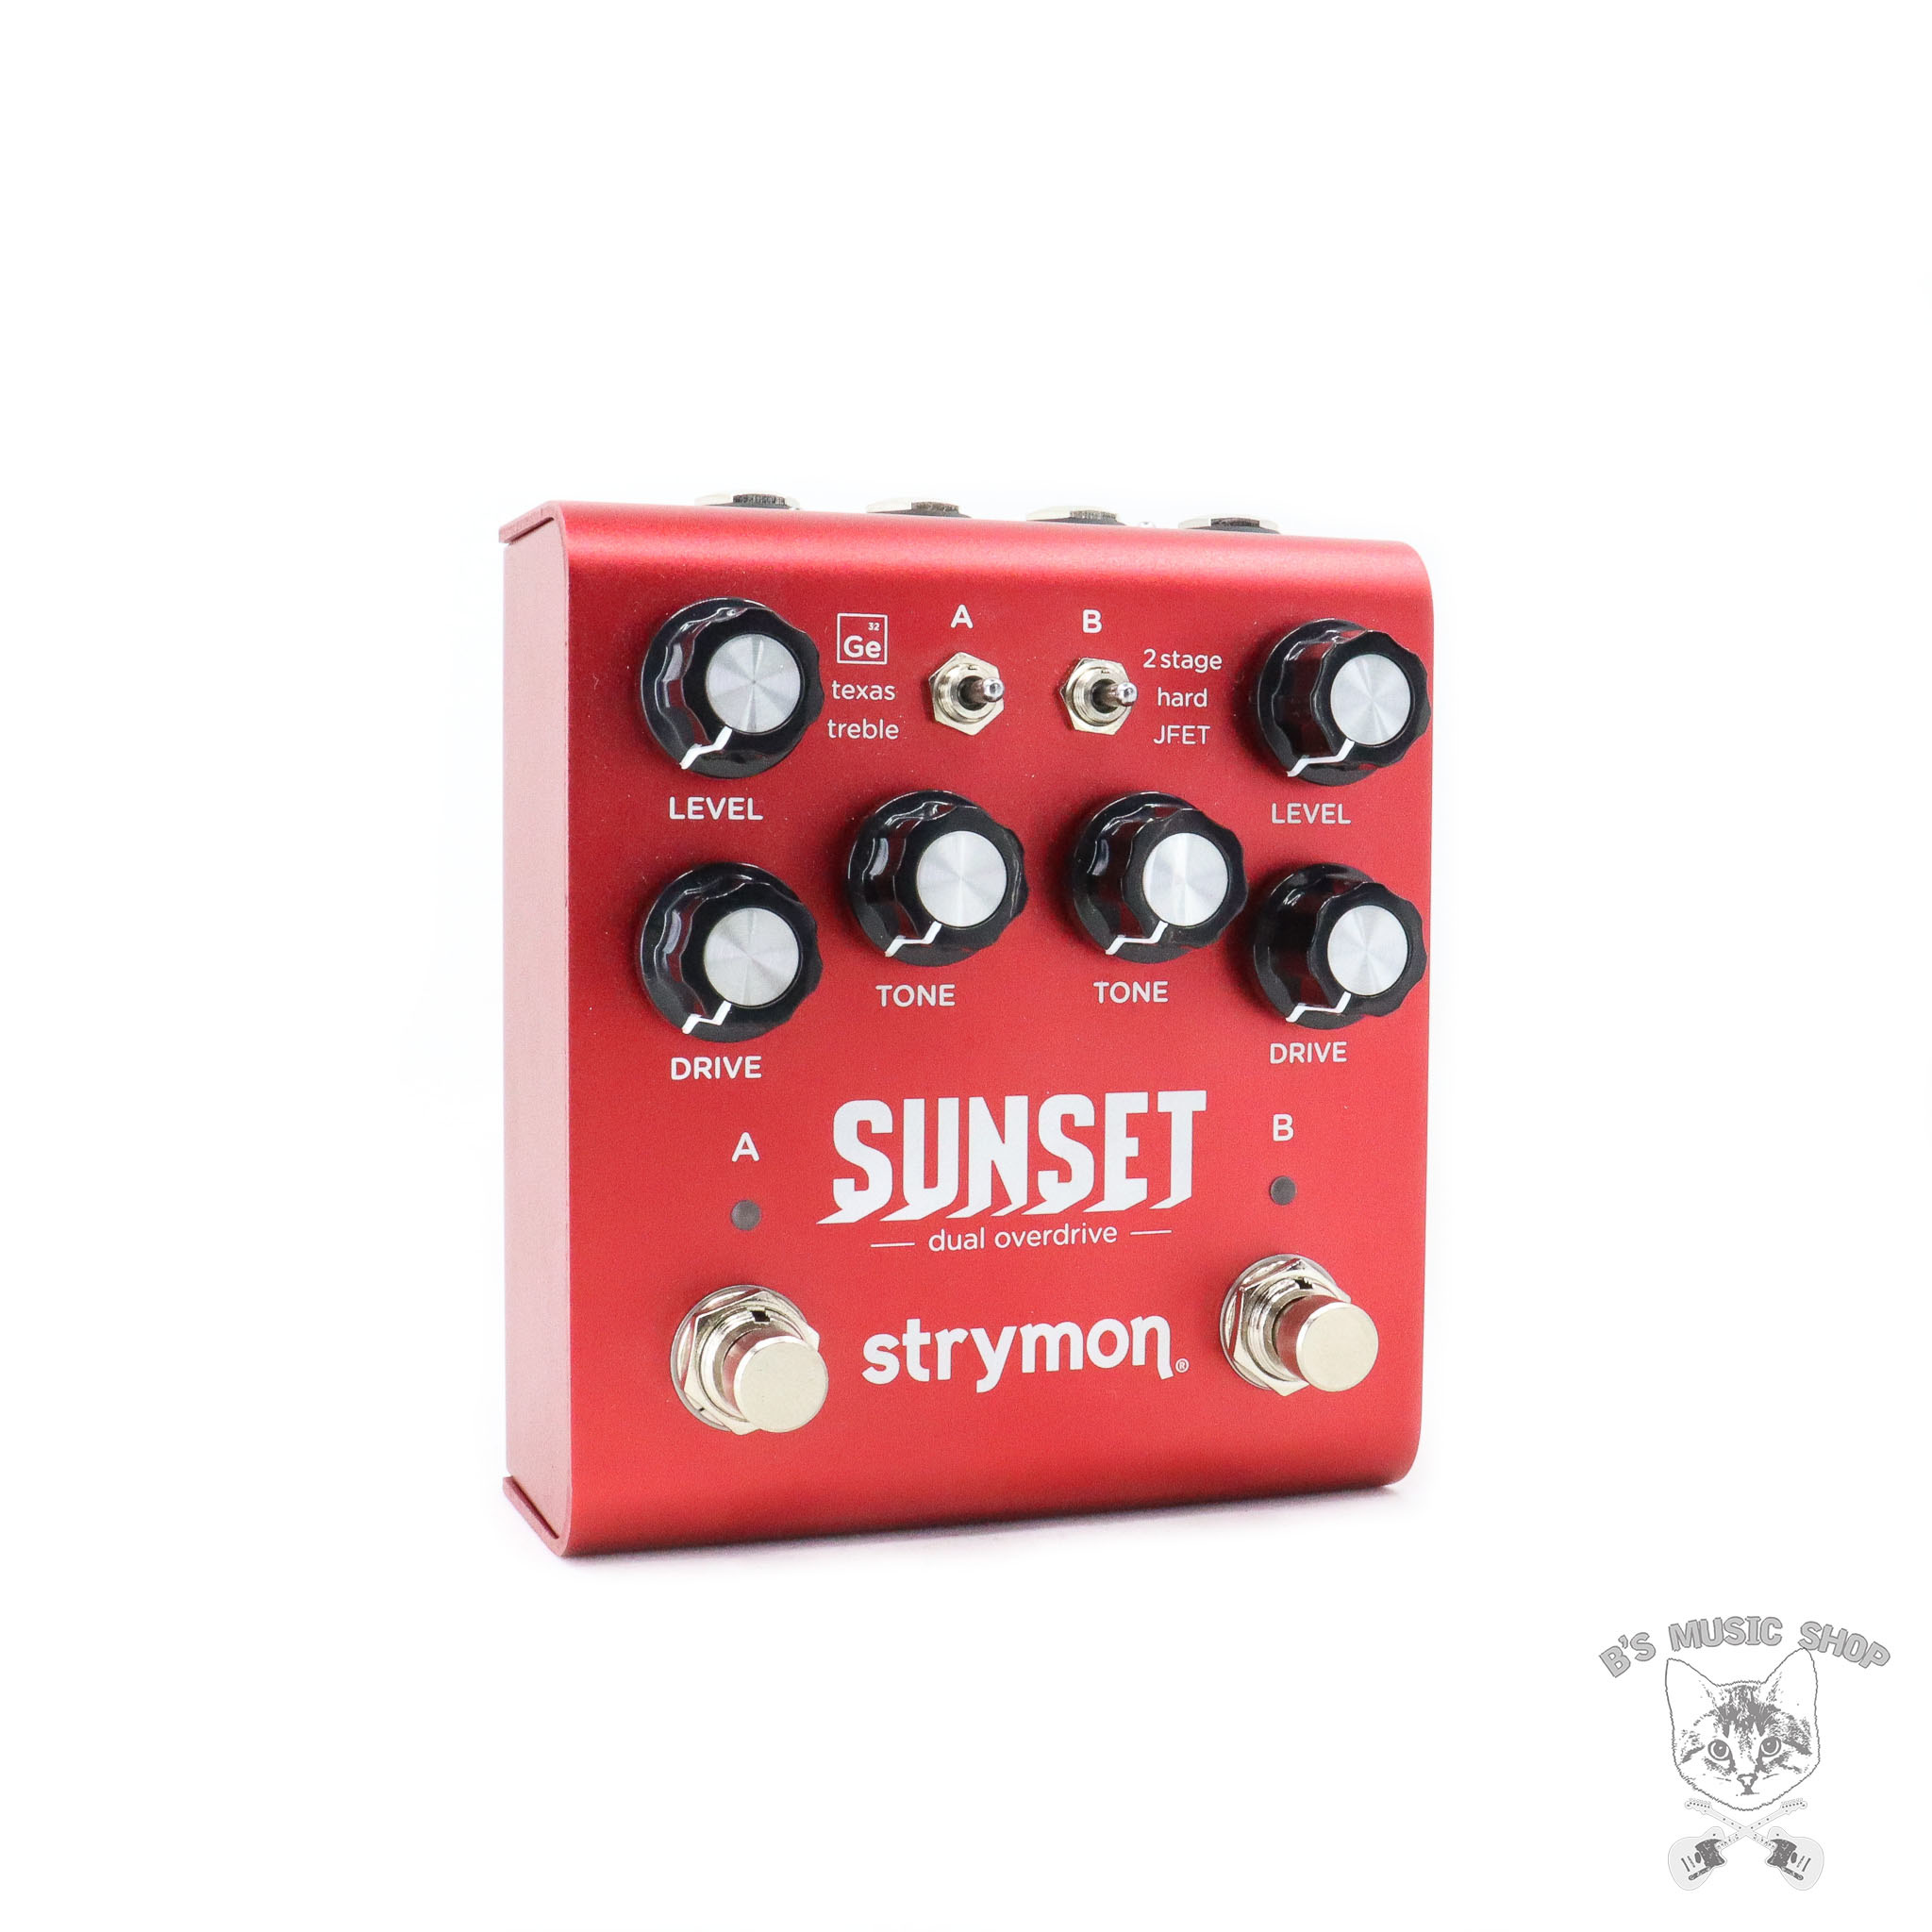 Strymon Sunset Dual Overdrive - Dual overdrive effect pedal - B's